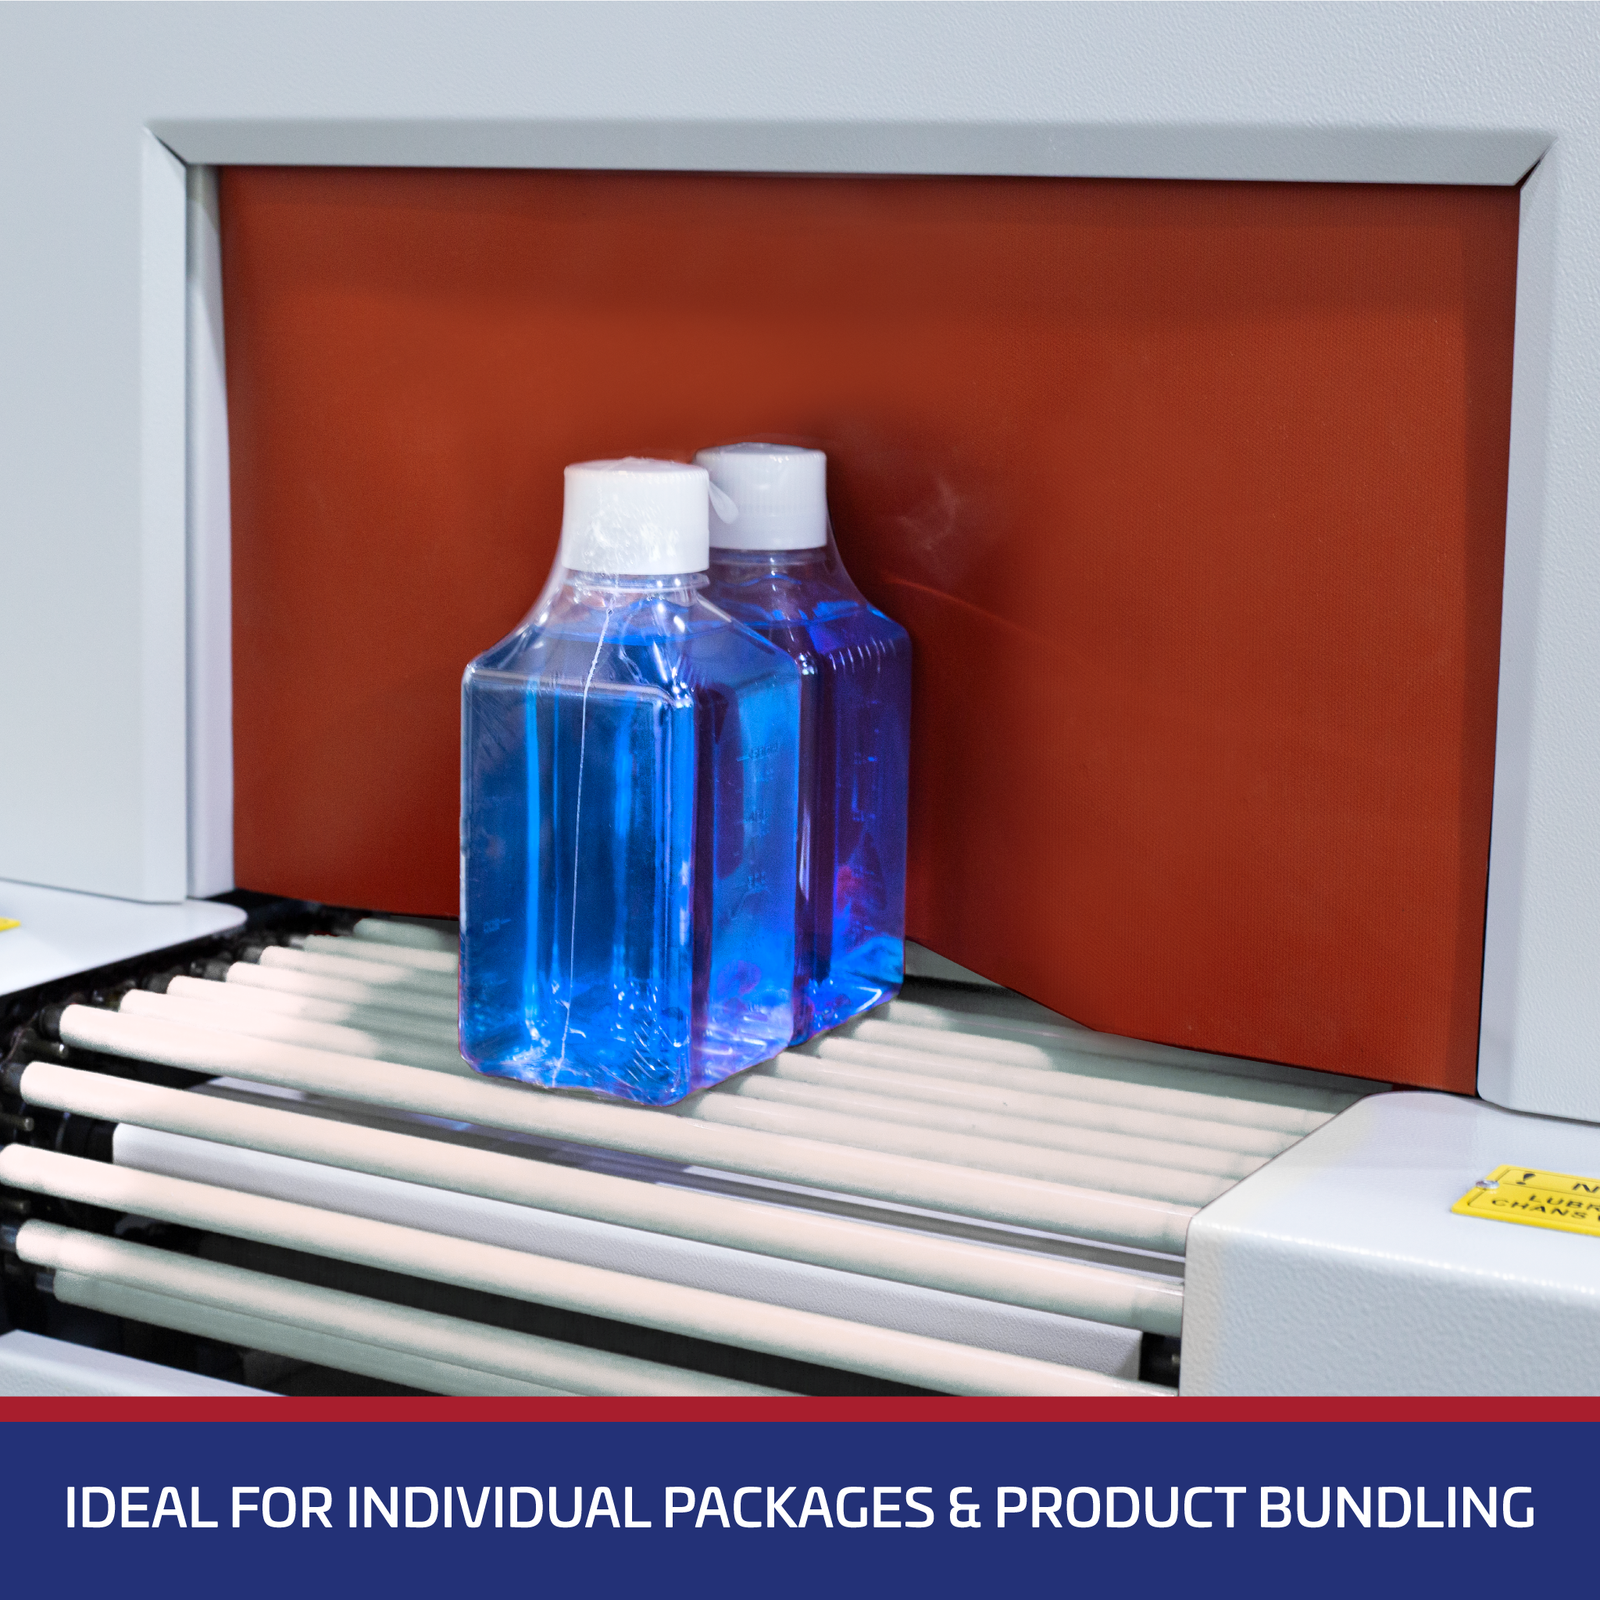 Close-up of the tunnel exit with 2 clear containers filled with a blue liquid bundled together by the shrink wrapping heat tunnel with shrink film. Text over blue background reads “ideal for individual packages and product bundling”